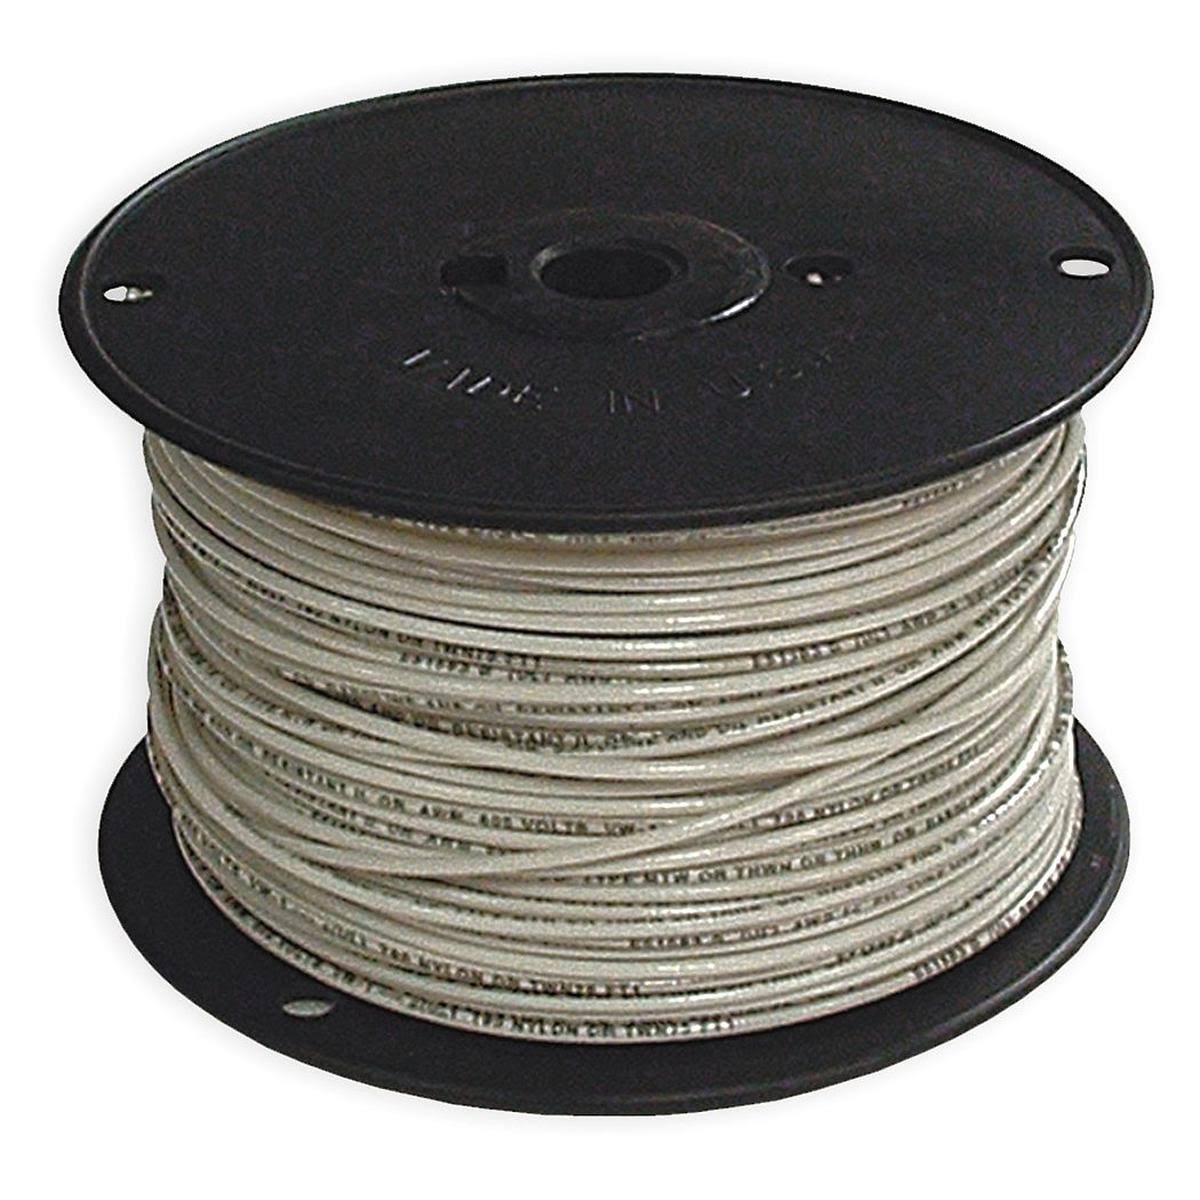 Southwire Company Building Wire - 14 Gauge, 500' White